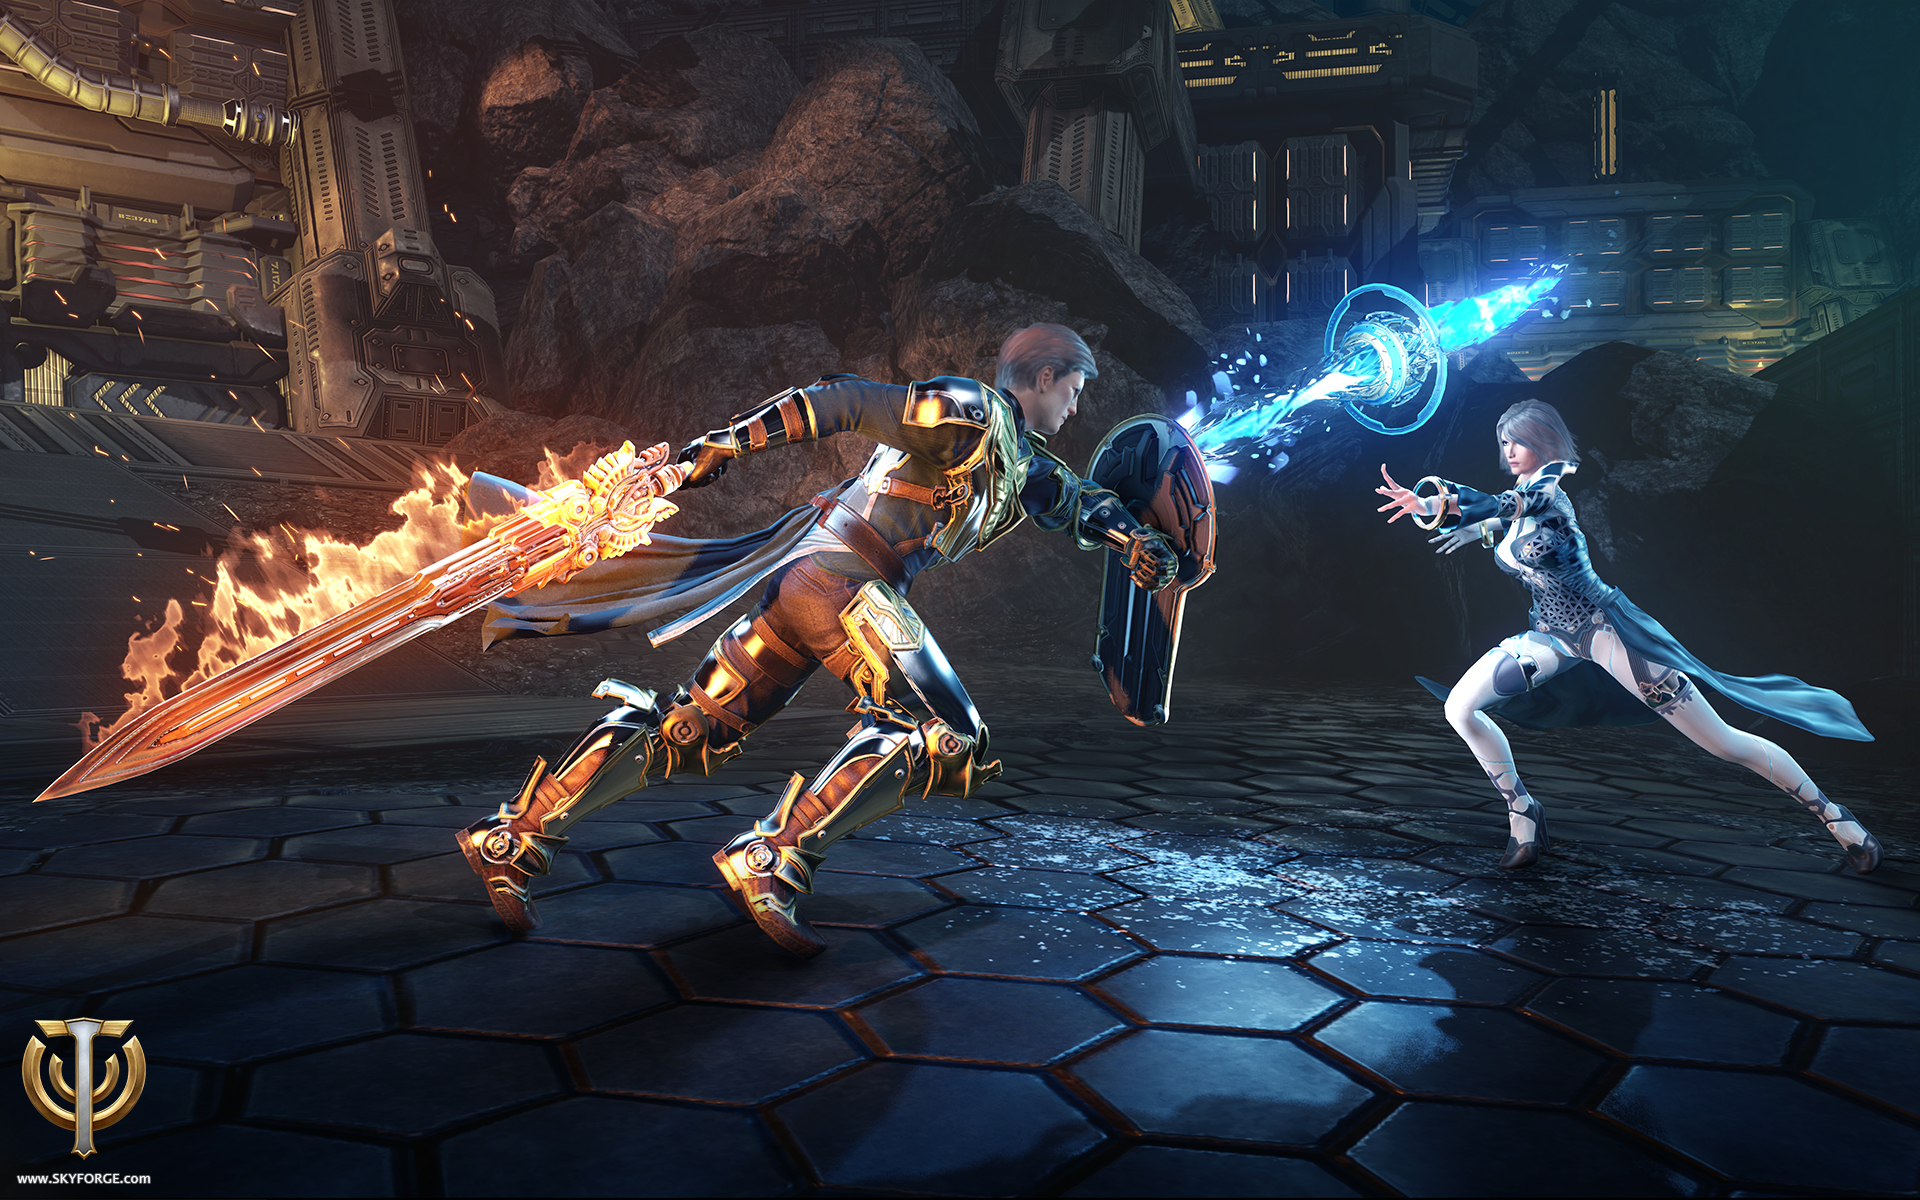 Skyforge Backgrounds, Compatible - PC, Mobile, Gadgets| 1920x1200 px